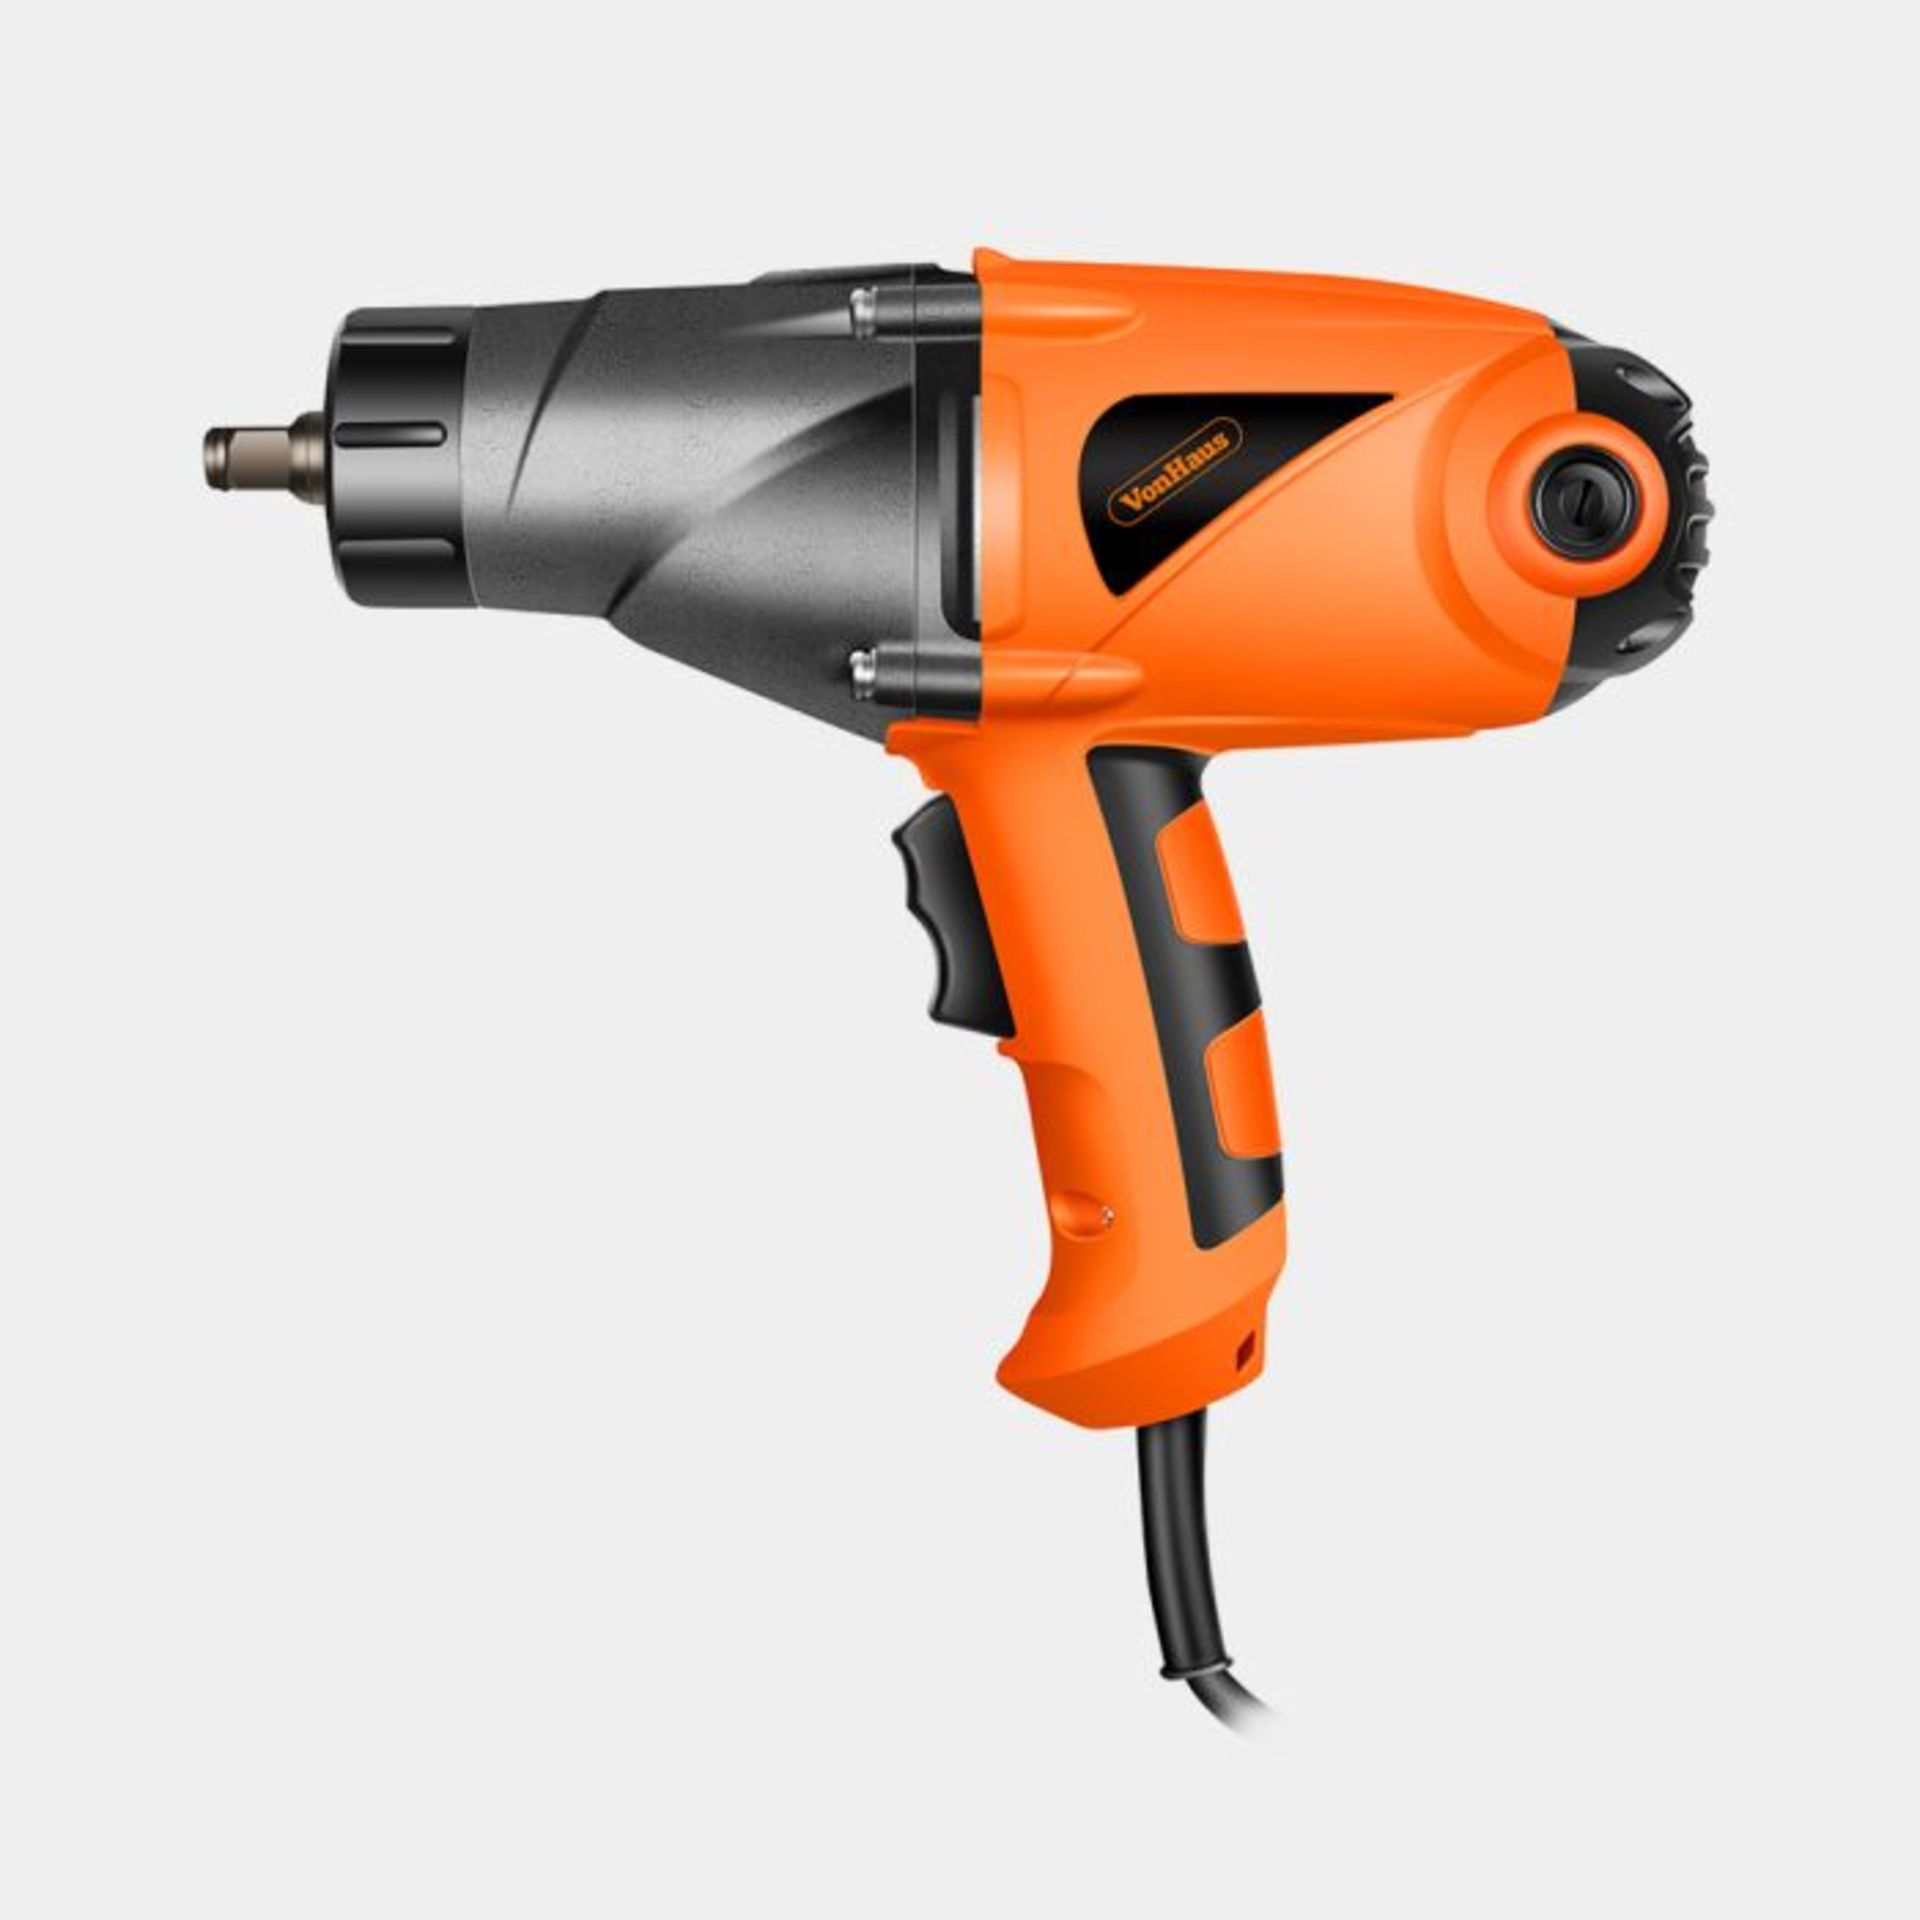 230V Impact Wrench with Square Drive. - BIM. Make easy work of heavy duty applications with